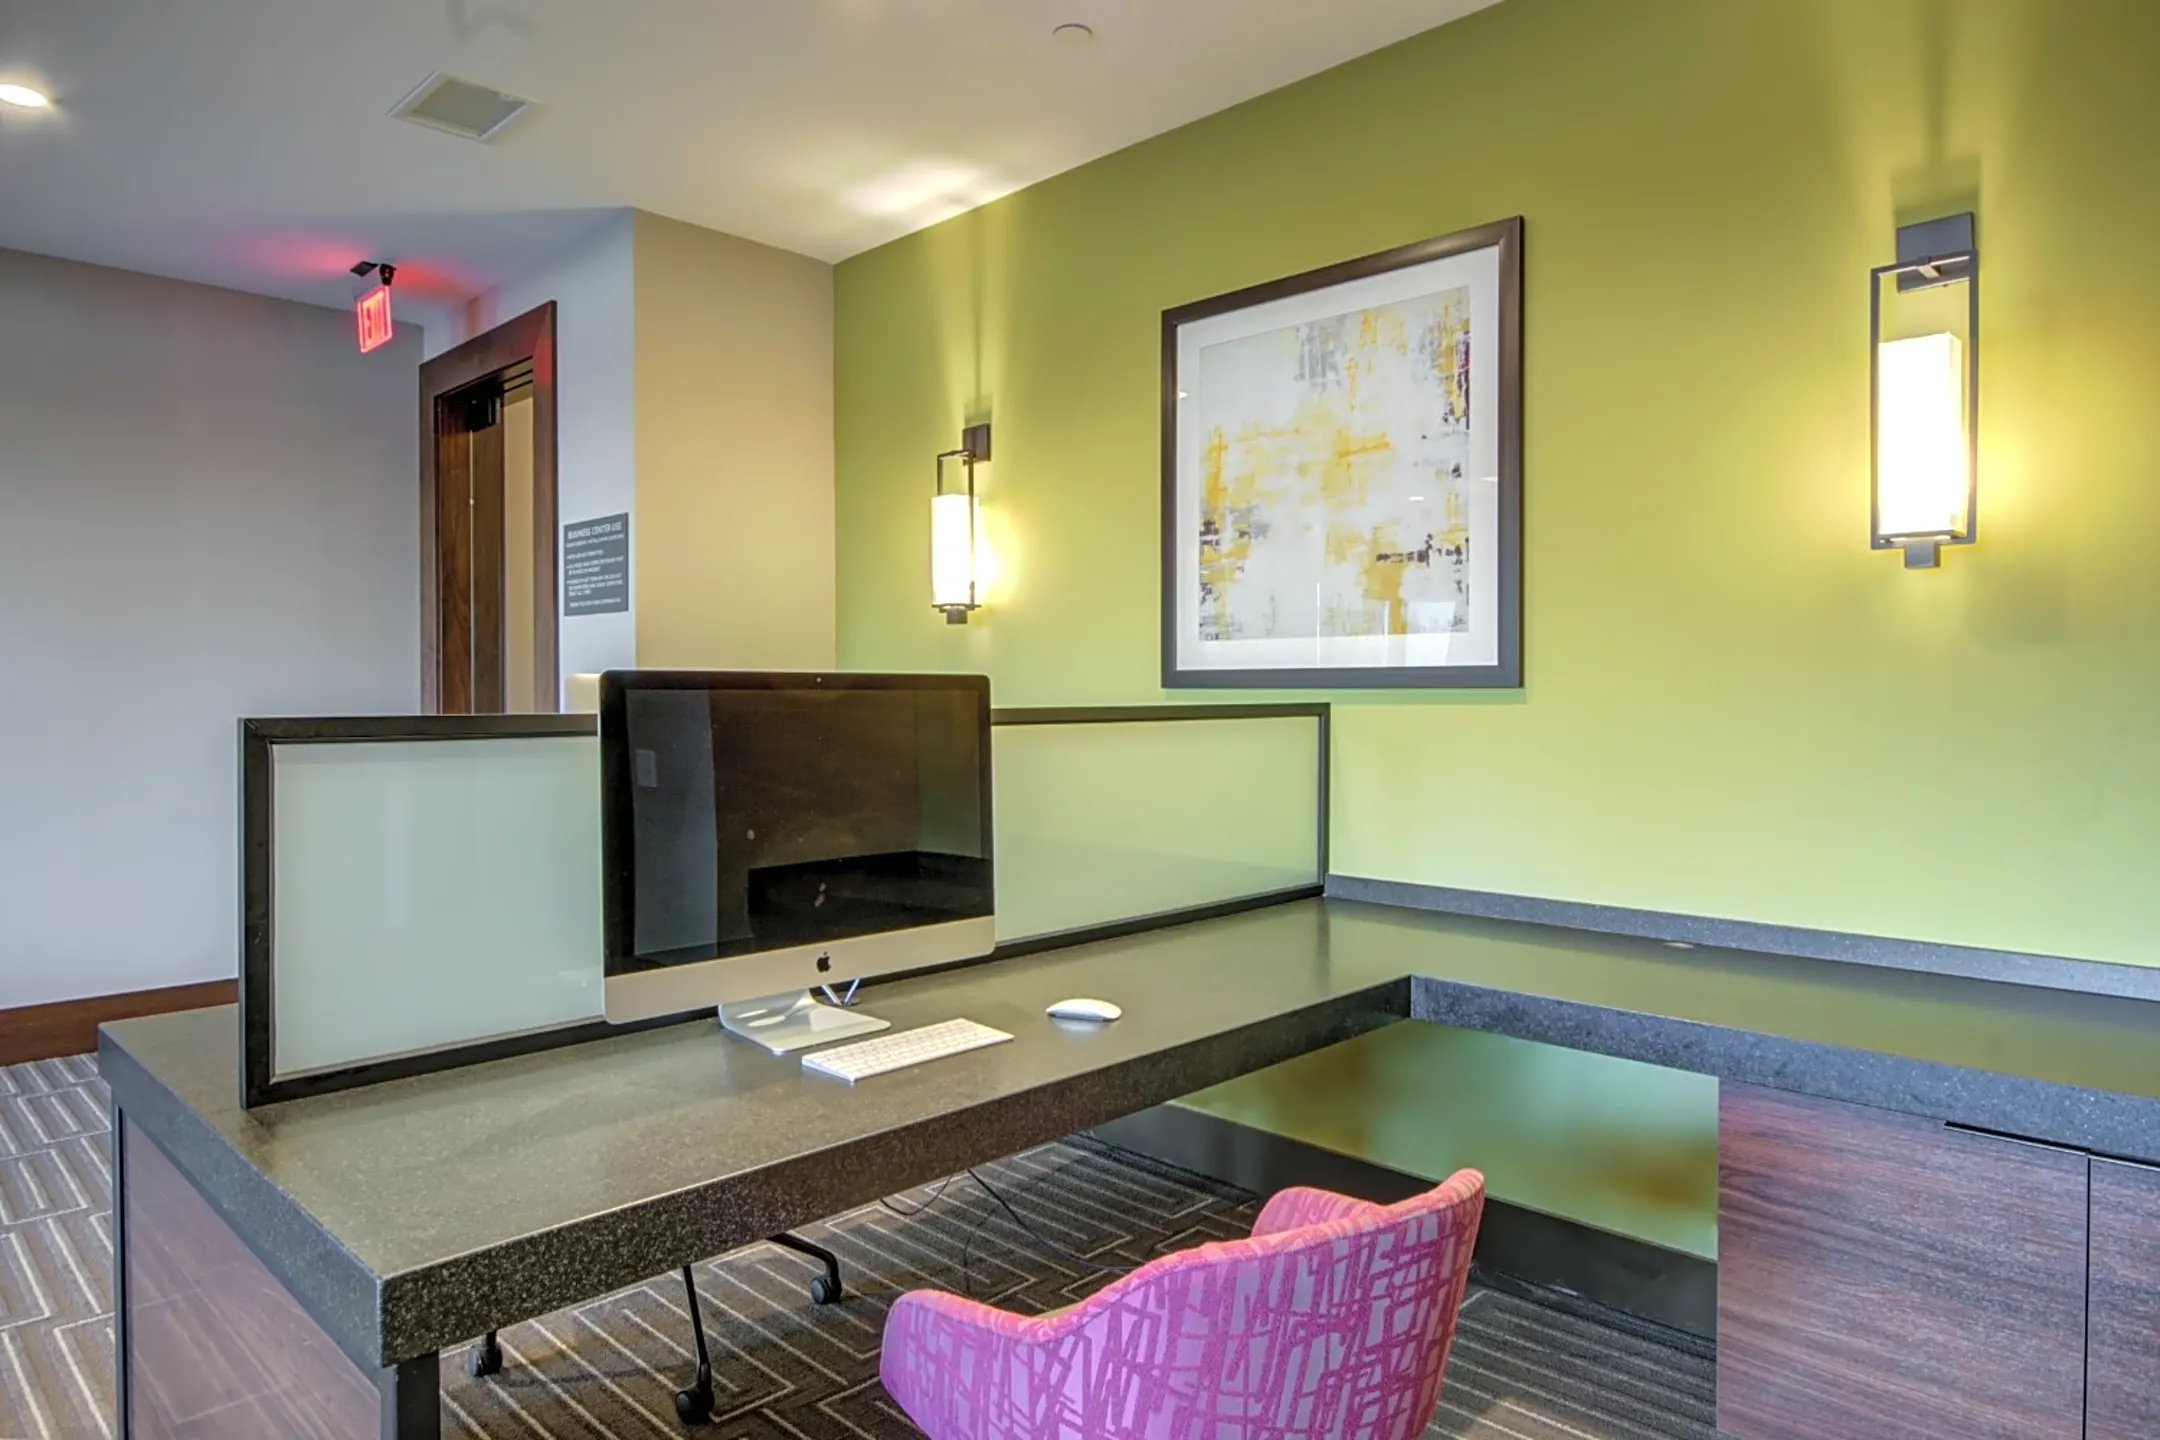 Recreation Area - The Residences at Annapolis Junction - Annapolis Junction, MD